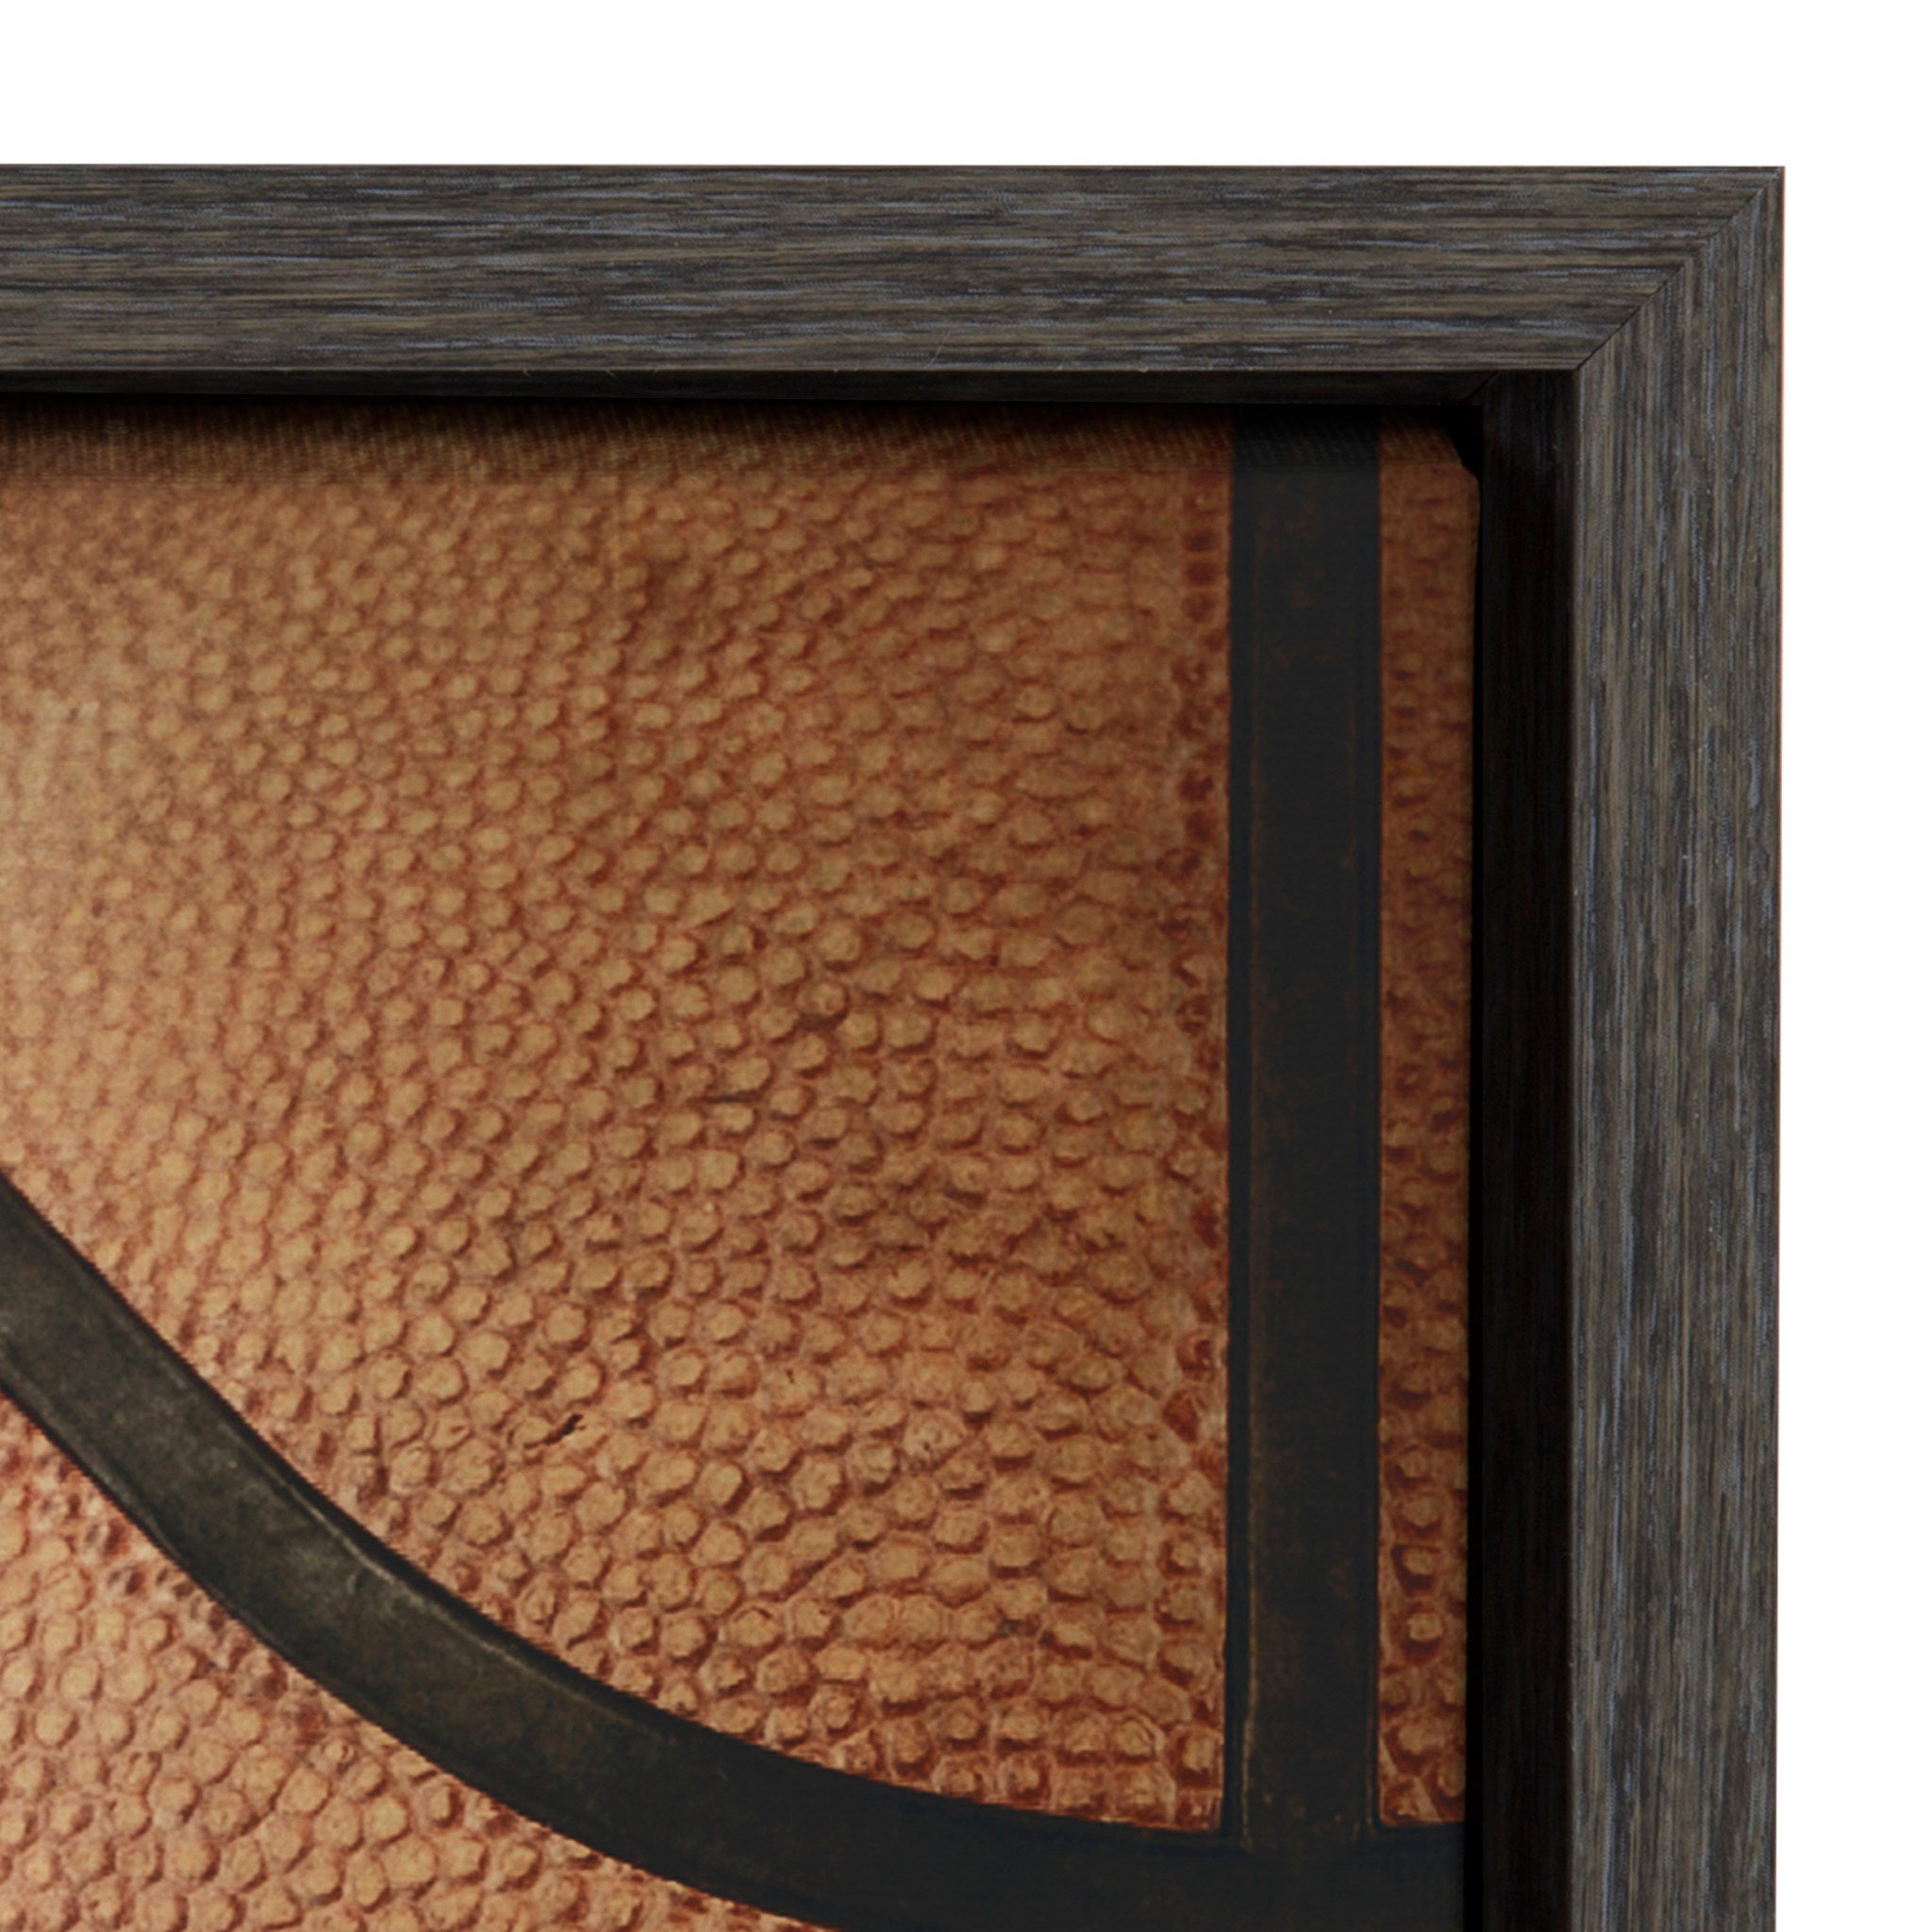 Sylvie Vintage Half Basketball Framed Canvas by Shawn St. Peter